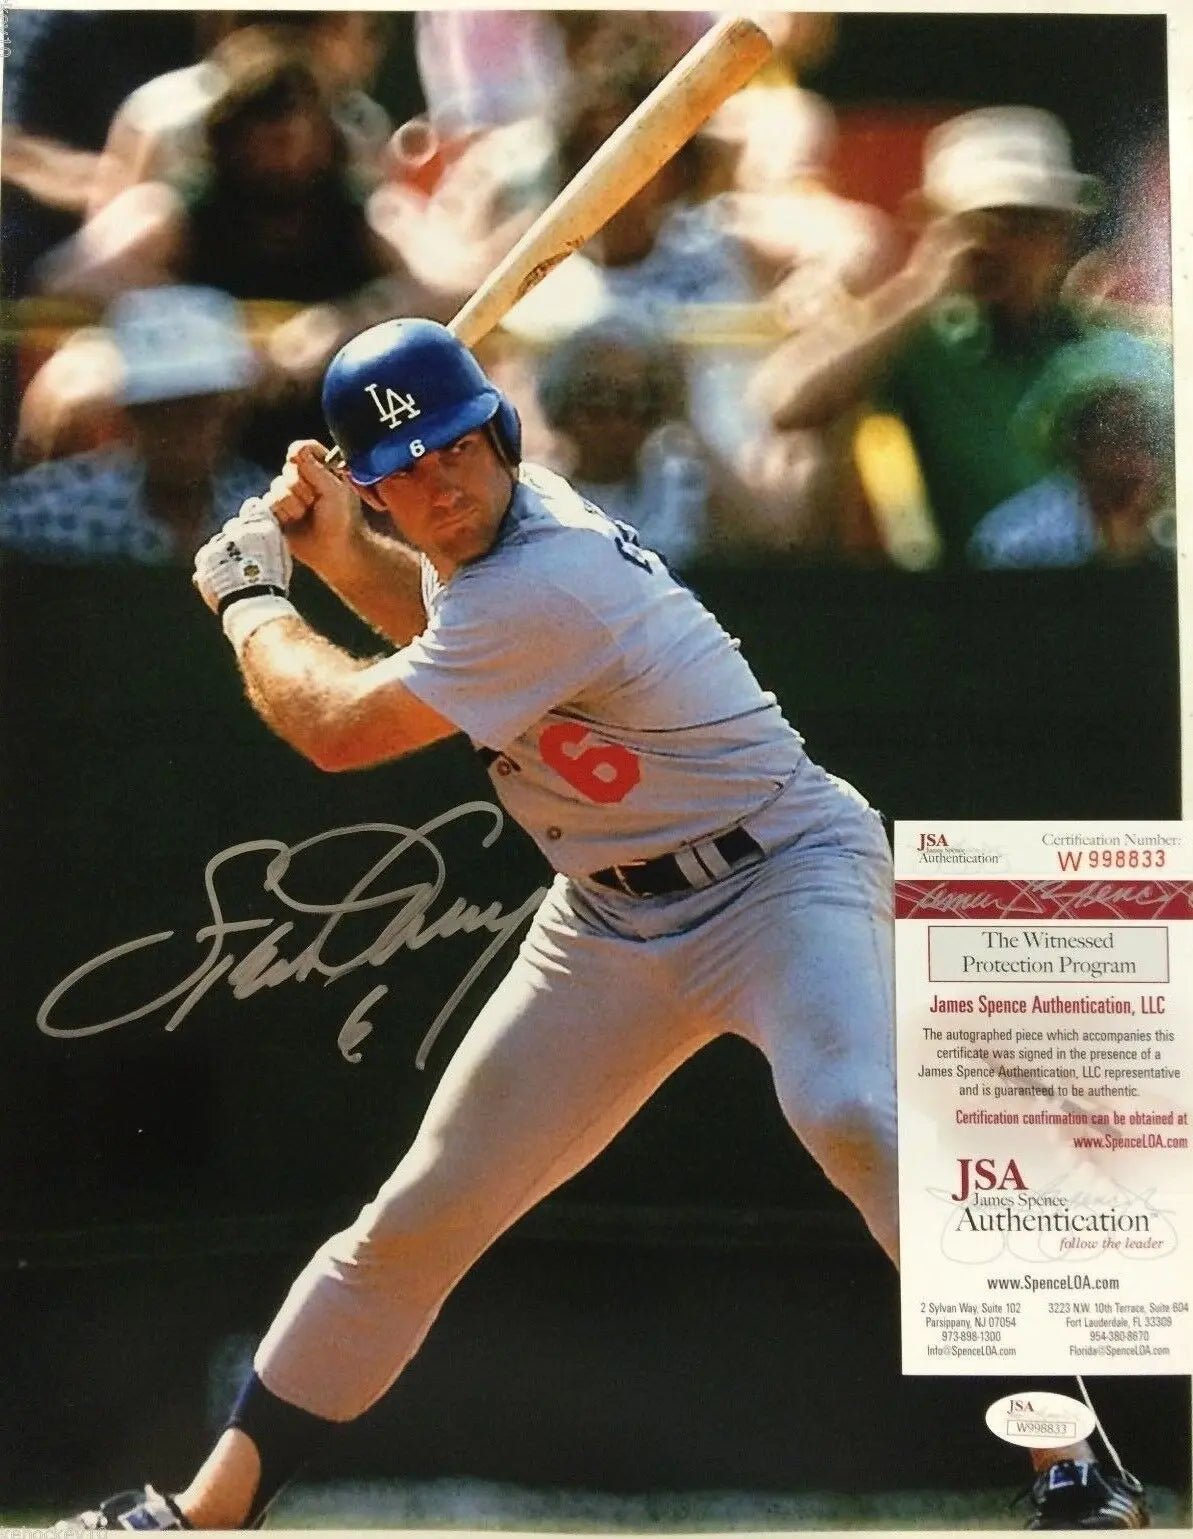 steve garvey jersey products for sale